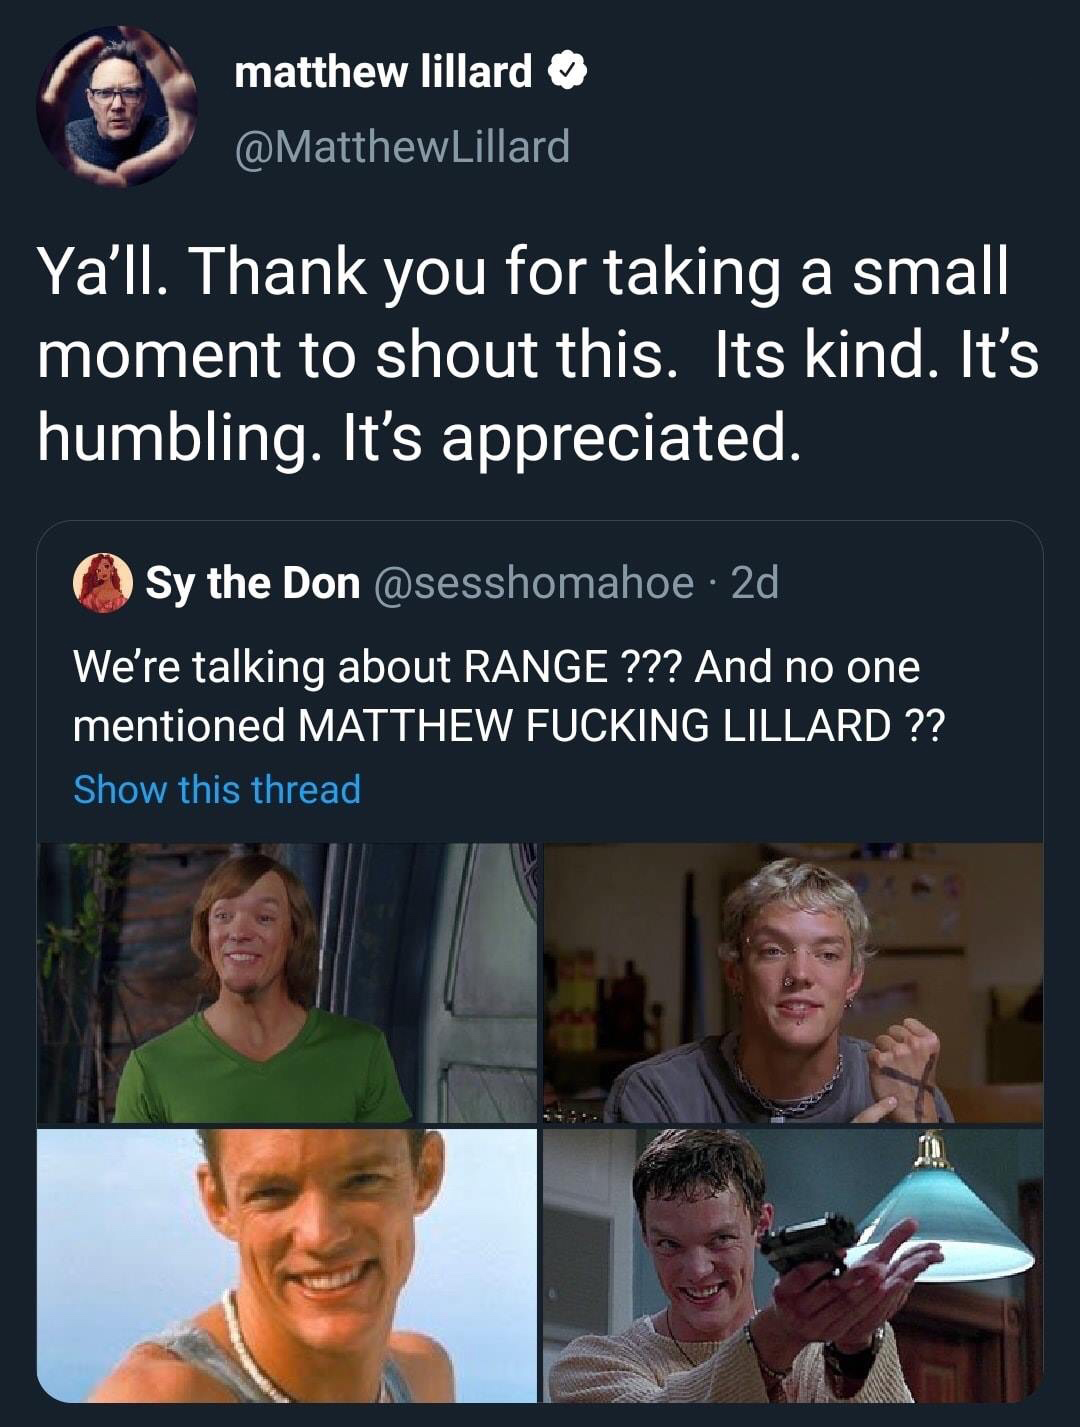 conversation - matthew lillard Lillard Yall. Thank you for taking a small moment to shout this. Its kind. It's humbling. It's appreciated. Sy the Don 2d We're talking about Range ??? And no one mentioned Matthew Fucking Lillard ?? Show this thread